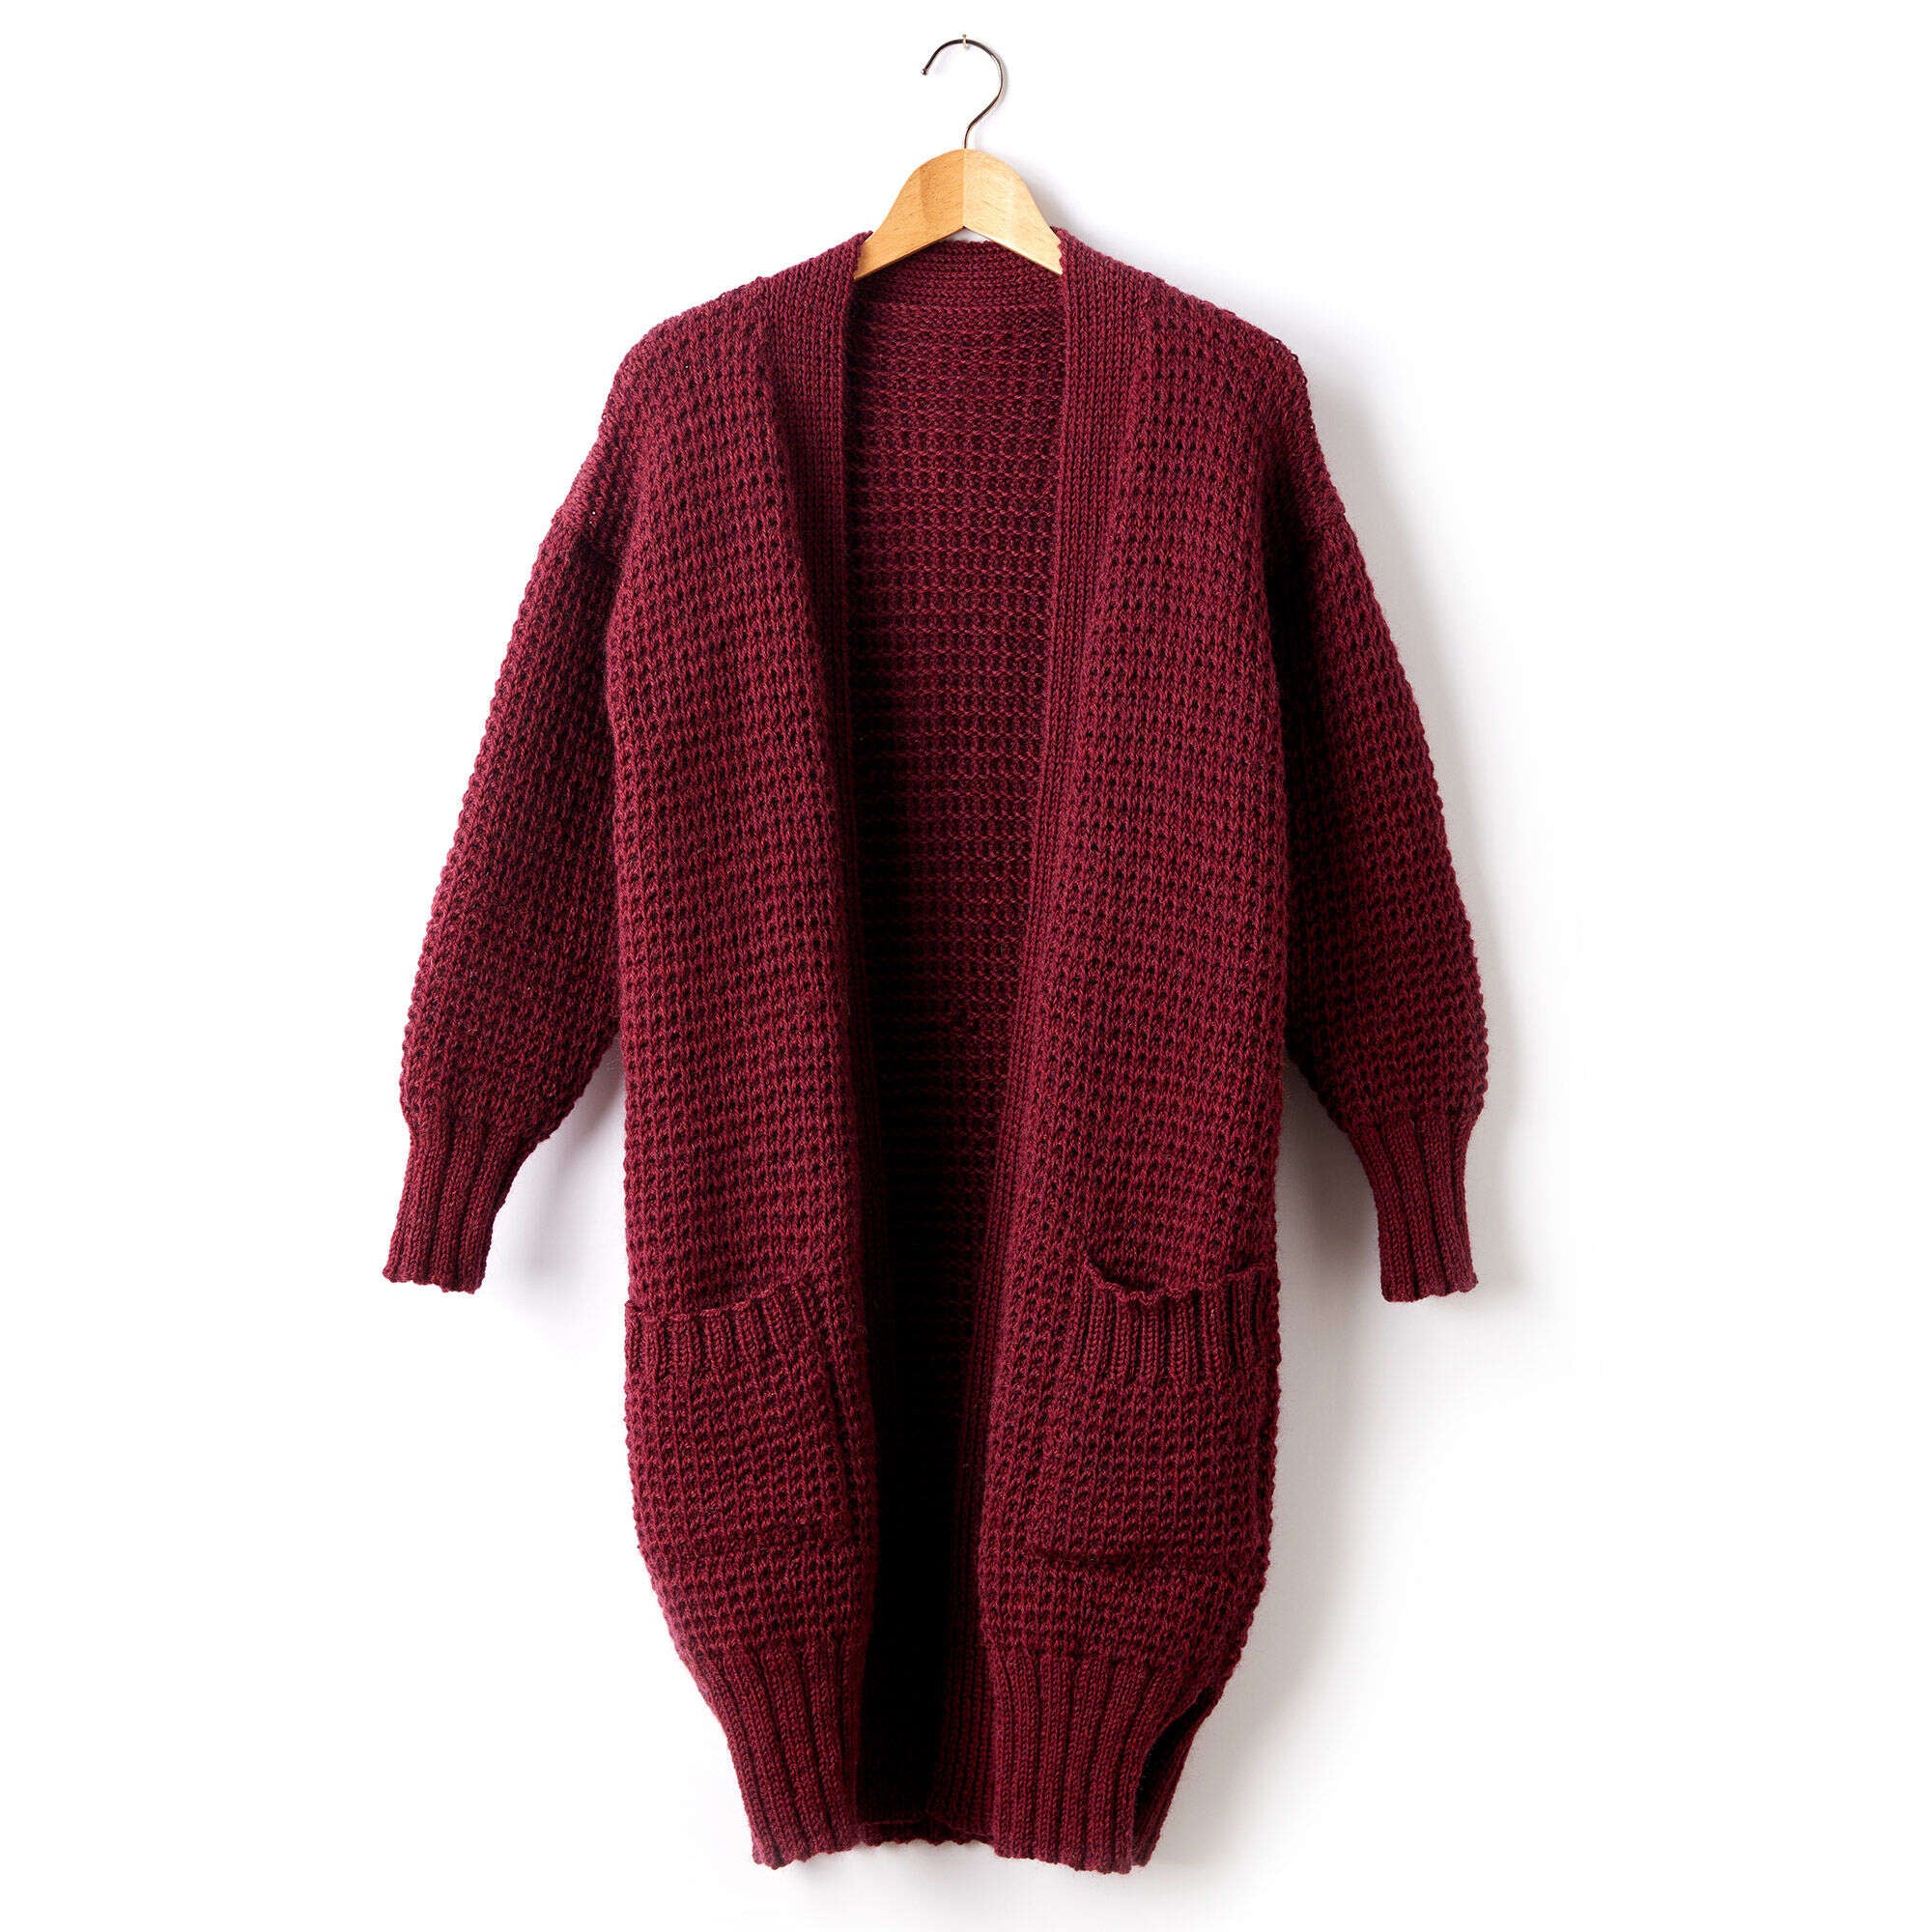 Free Pattern: Patons Long Weekend Knit Cardigan in Patons Classic Wool Worsted yarn